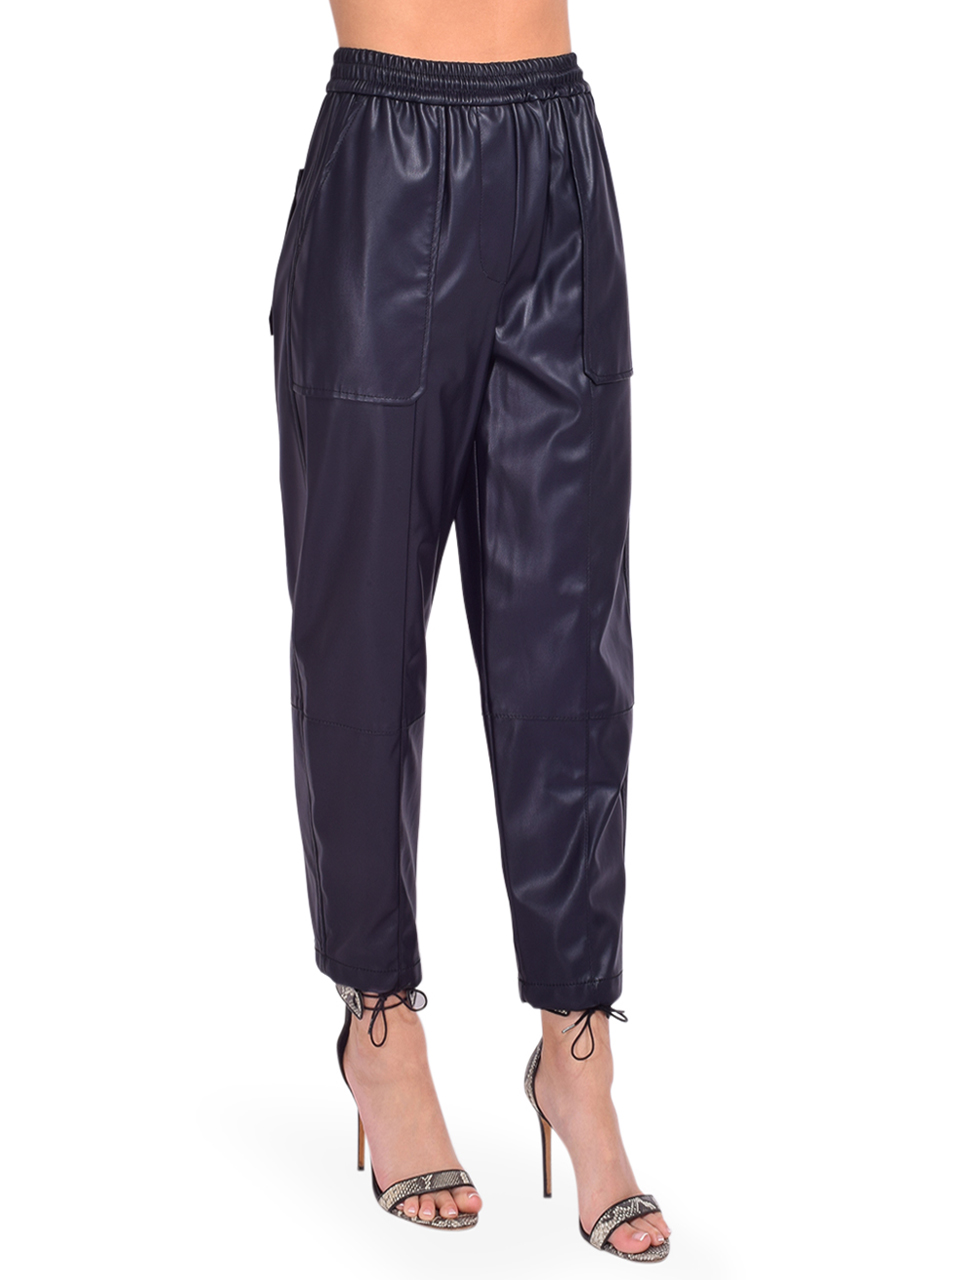 3.1 Phillip Lim Vegan Leather Trouser in Ink Side View 

